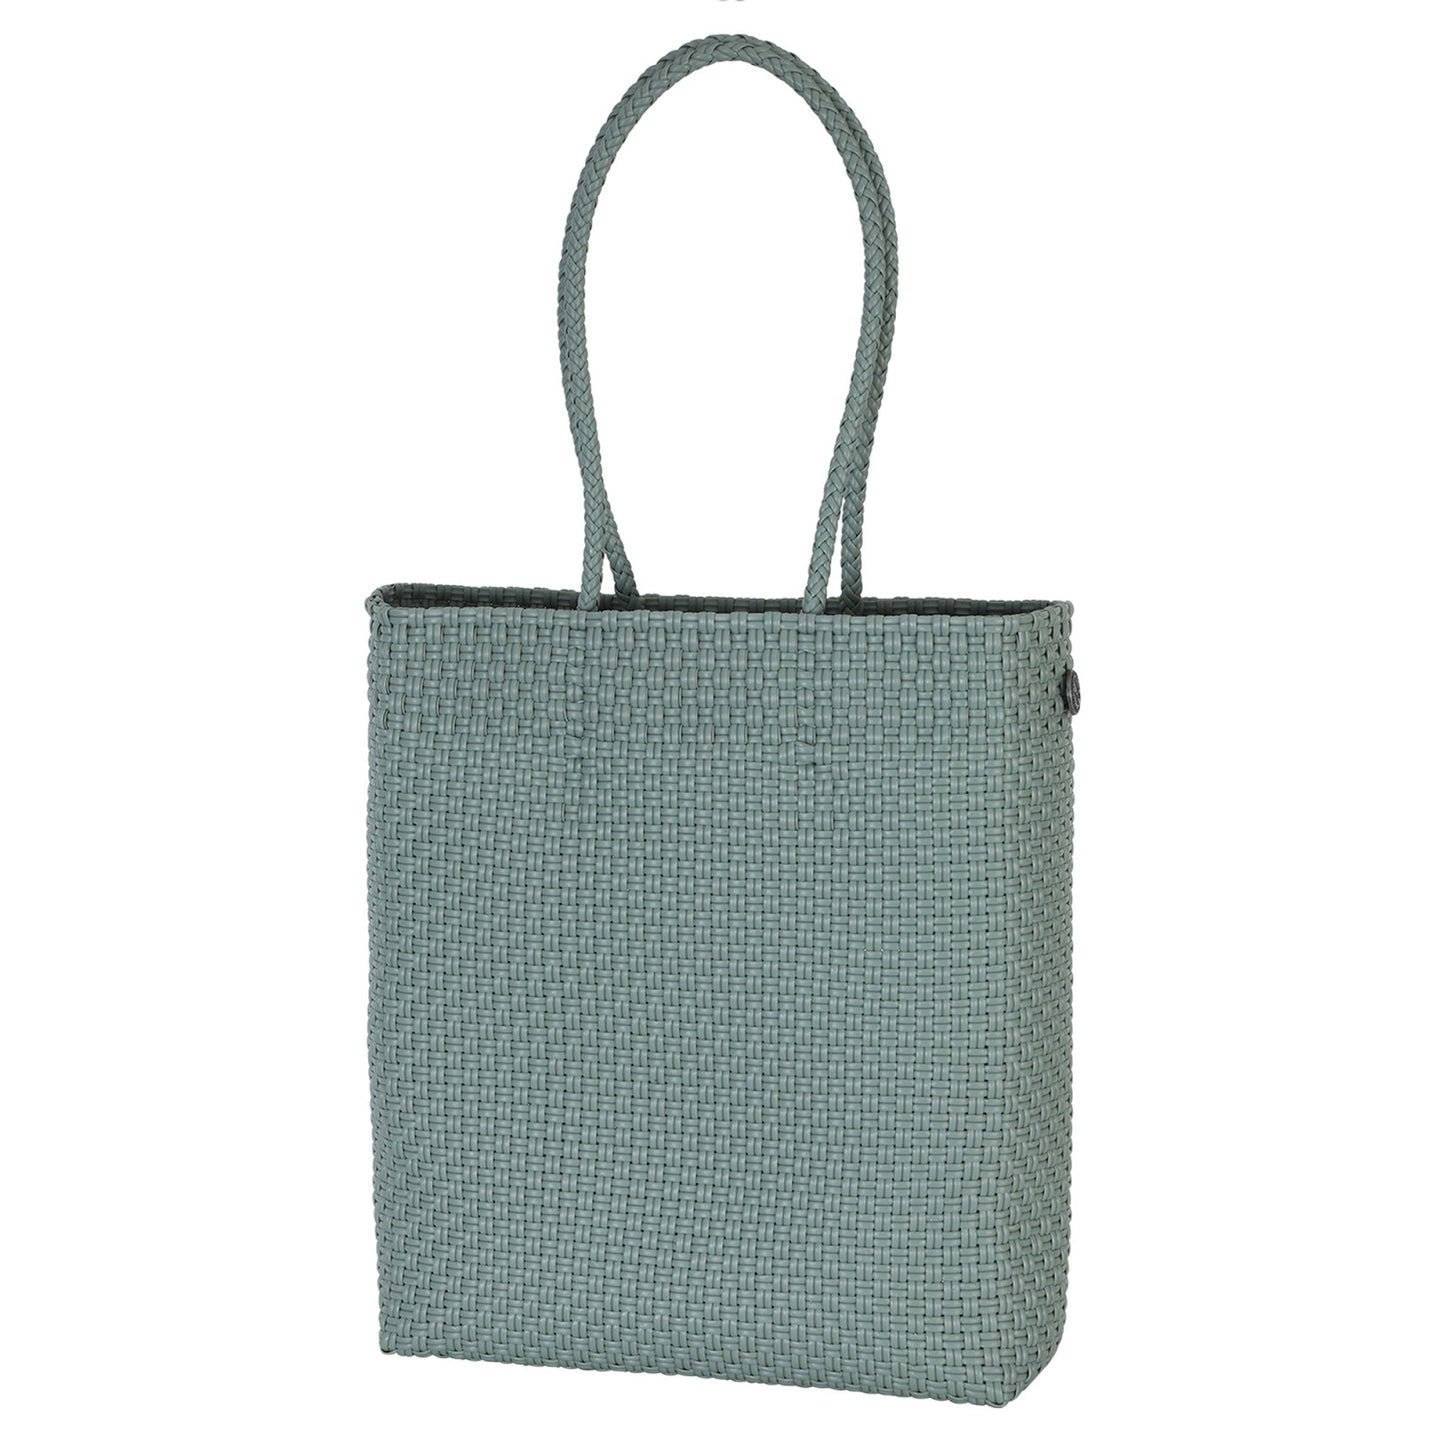 Handed By - SOLO tall shopper - 77 - sage green